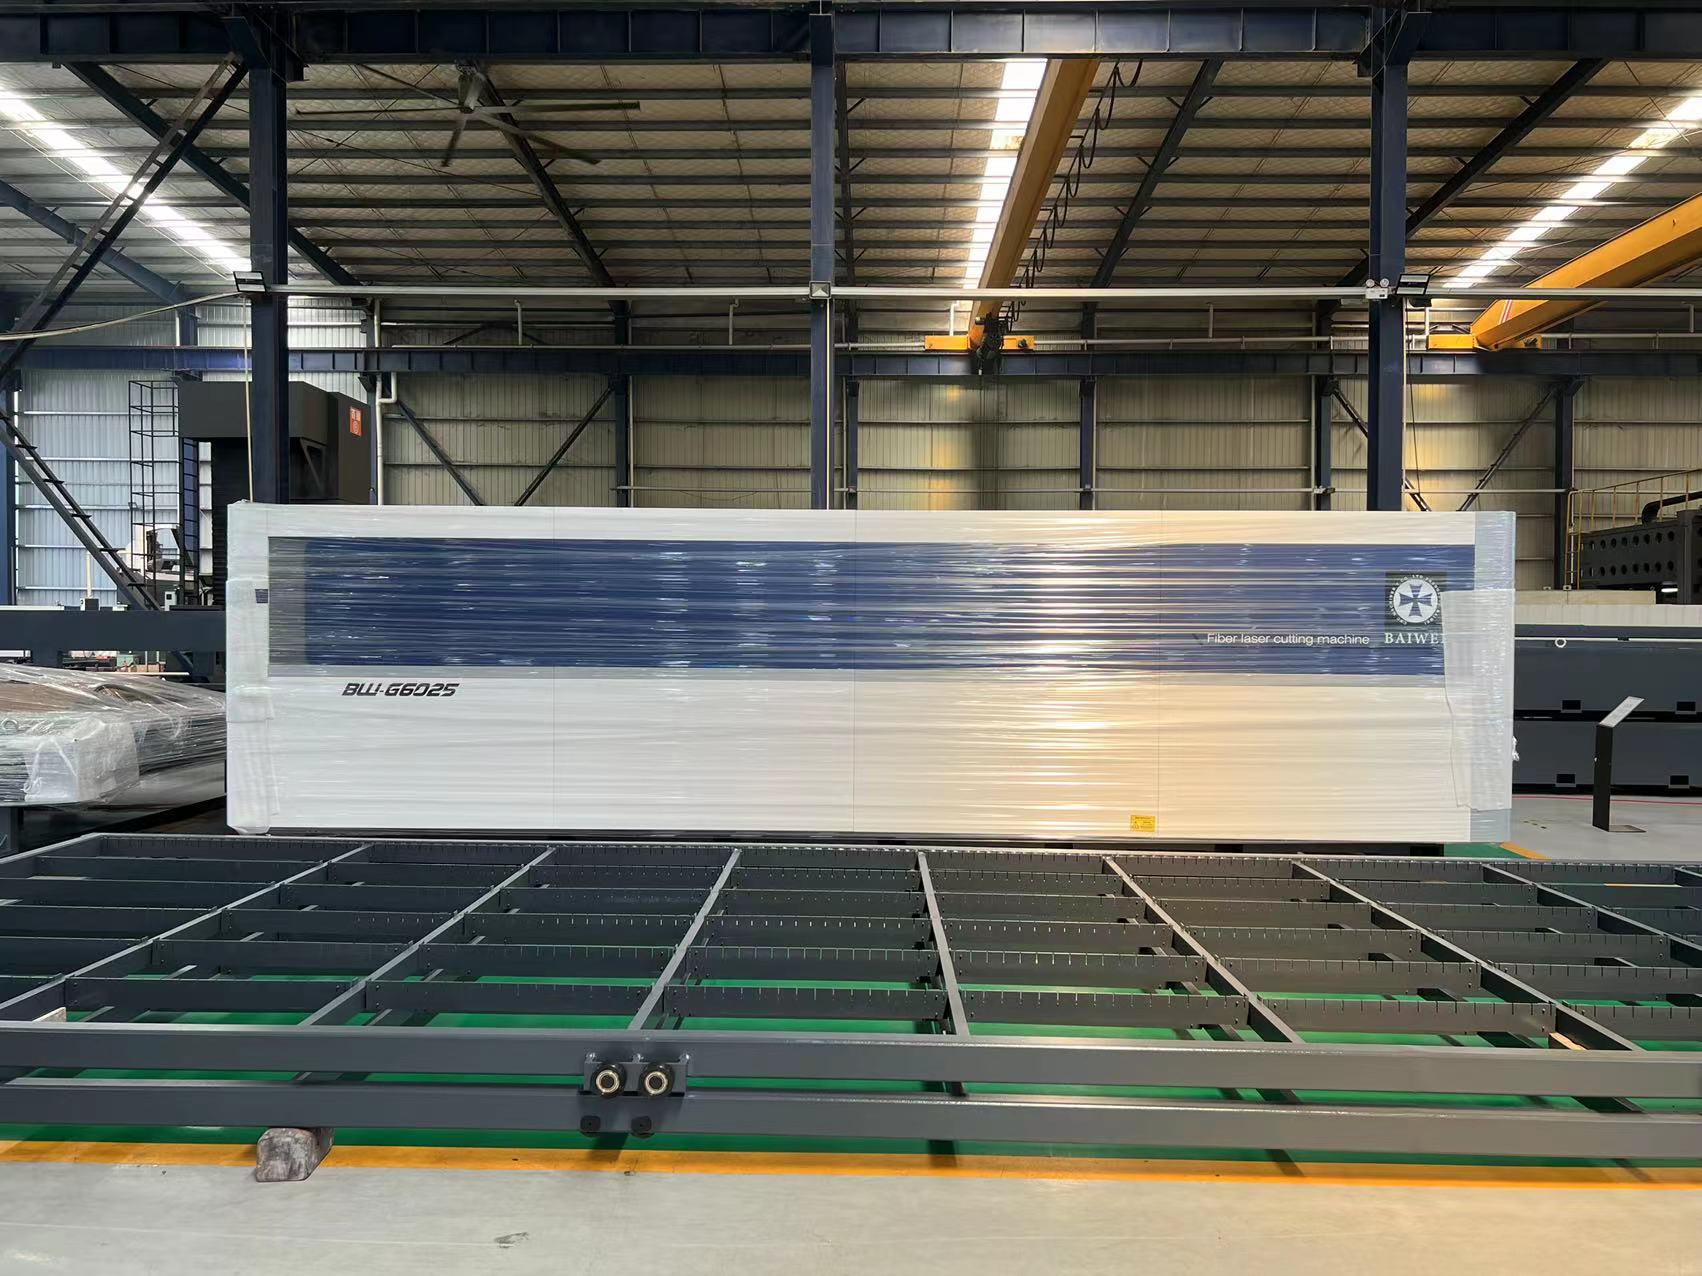 Sheet Metal Laser Cutting Machine Applicable Materials Stainless steel, carbon steel, aluminum alloy, galvanized iron, silicon steel, copper and other sheet metal materials.